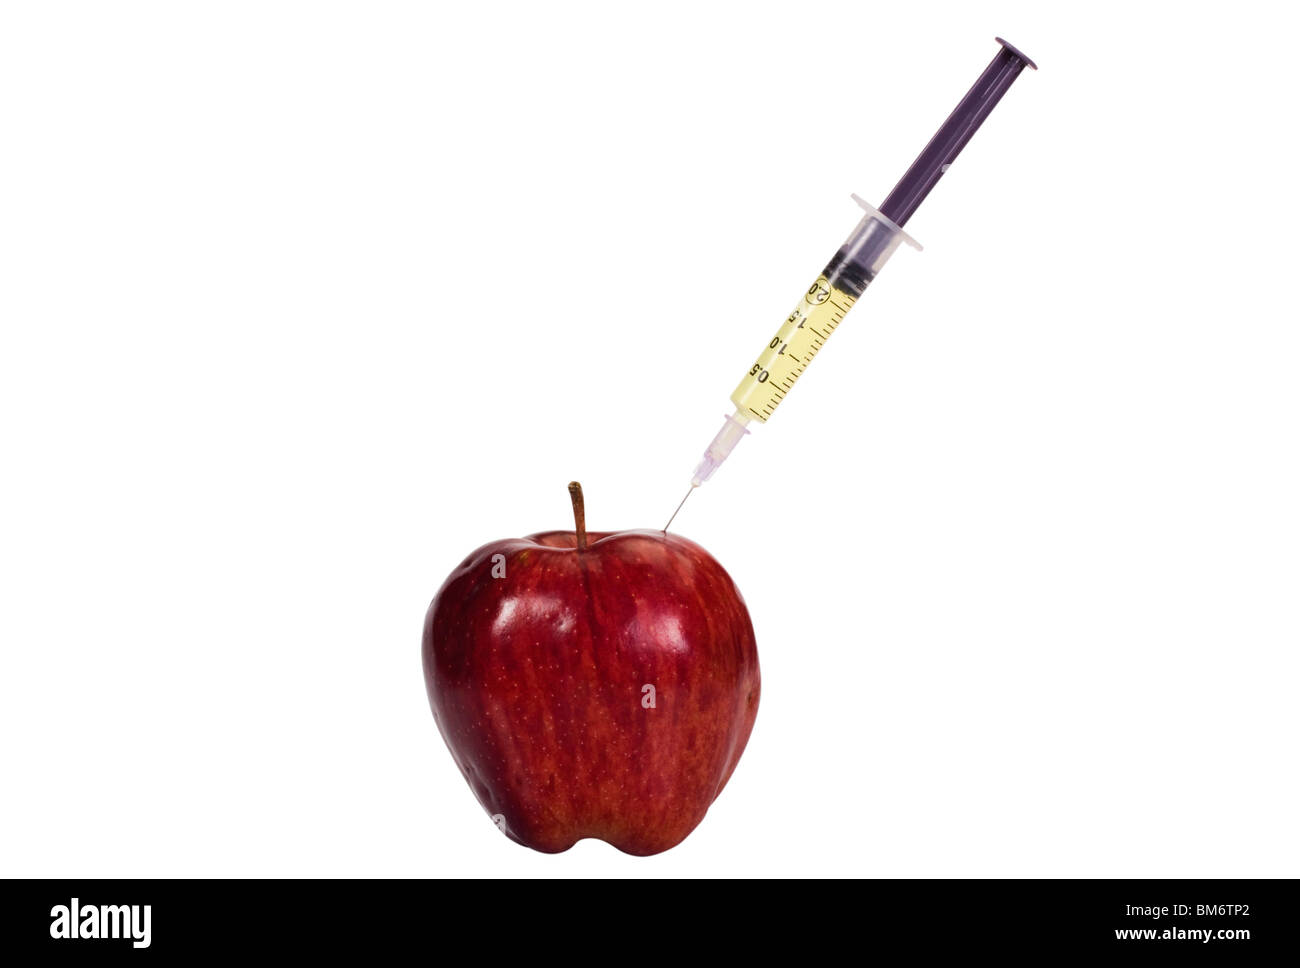 Syringe being injected into an apple Stock Photo